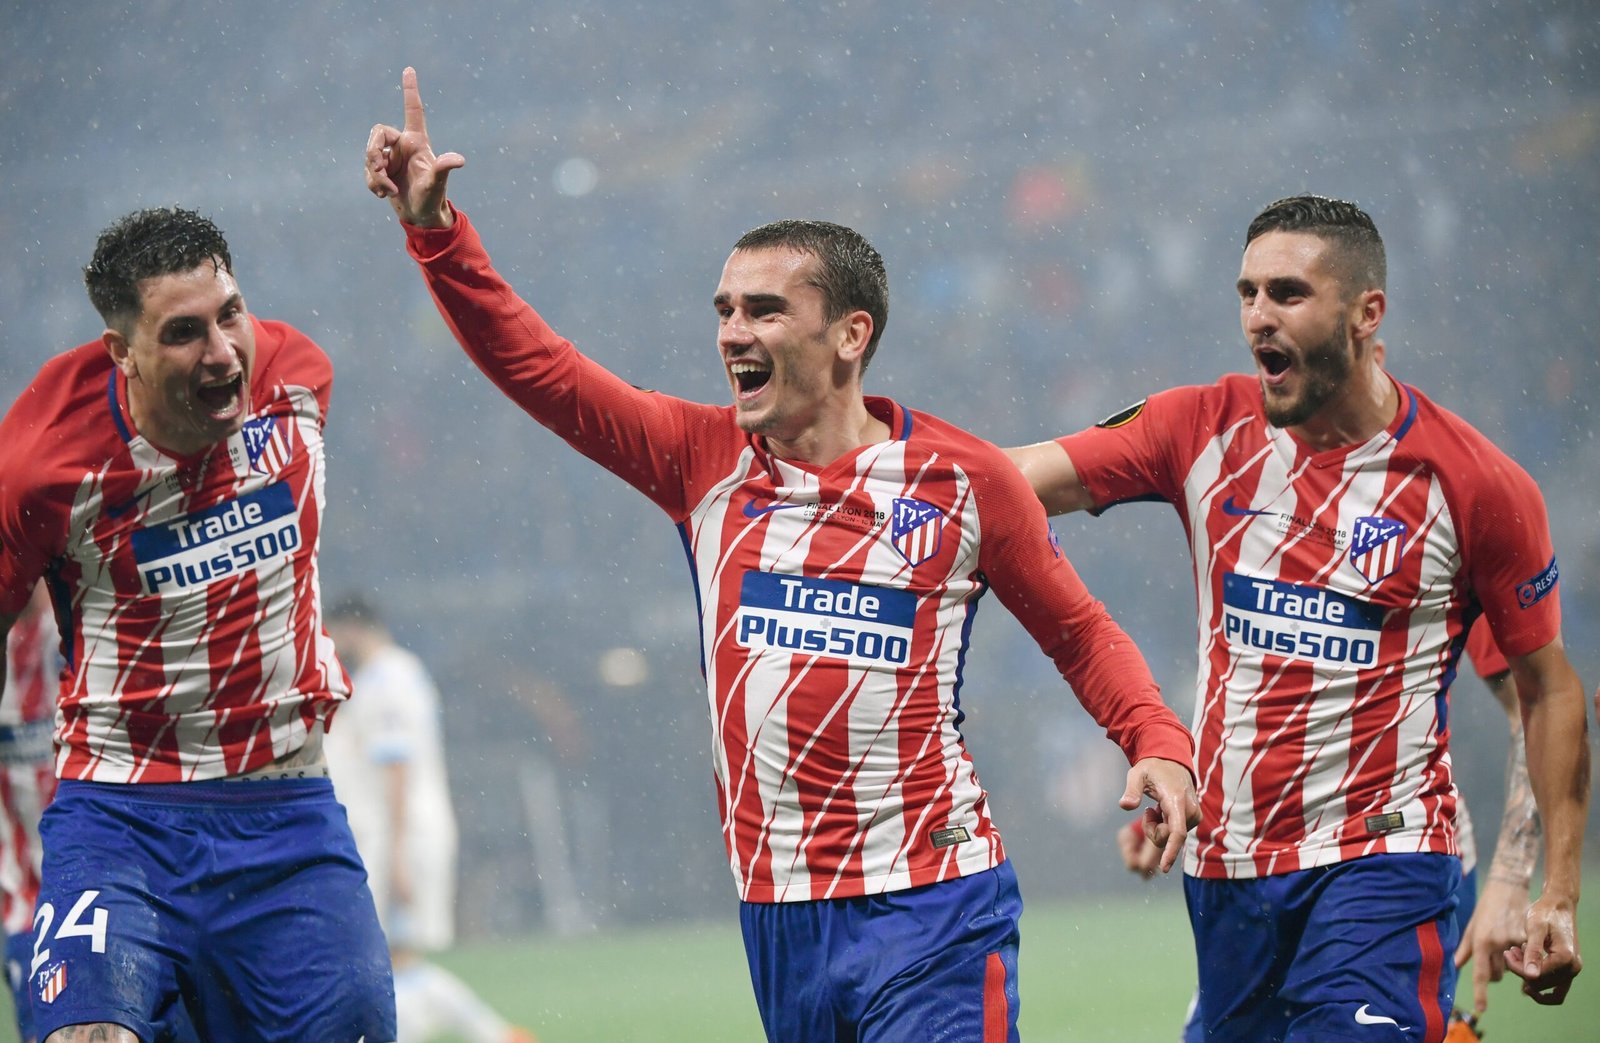 Atletico Madrid's French forward Antoine Griezmann (C) celebrates with Atletico Madrid's Uruguayan defender Jose Gimenez (L) and Atletico Madrid's Spanish midfielder Koke after scoring his second goal during the UEFA Europa League final football match between Olympique de Marseille and Club Atletico de Madrid at the Parc OL stadium in Decines-Charpieu, near Lyon on May 16, 2018. (Photo by Philippe DESMAZES / AFP) (Photo credit should read PHILIPPE DESMAZES/AFP via Getty Images)